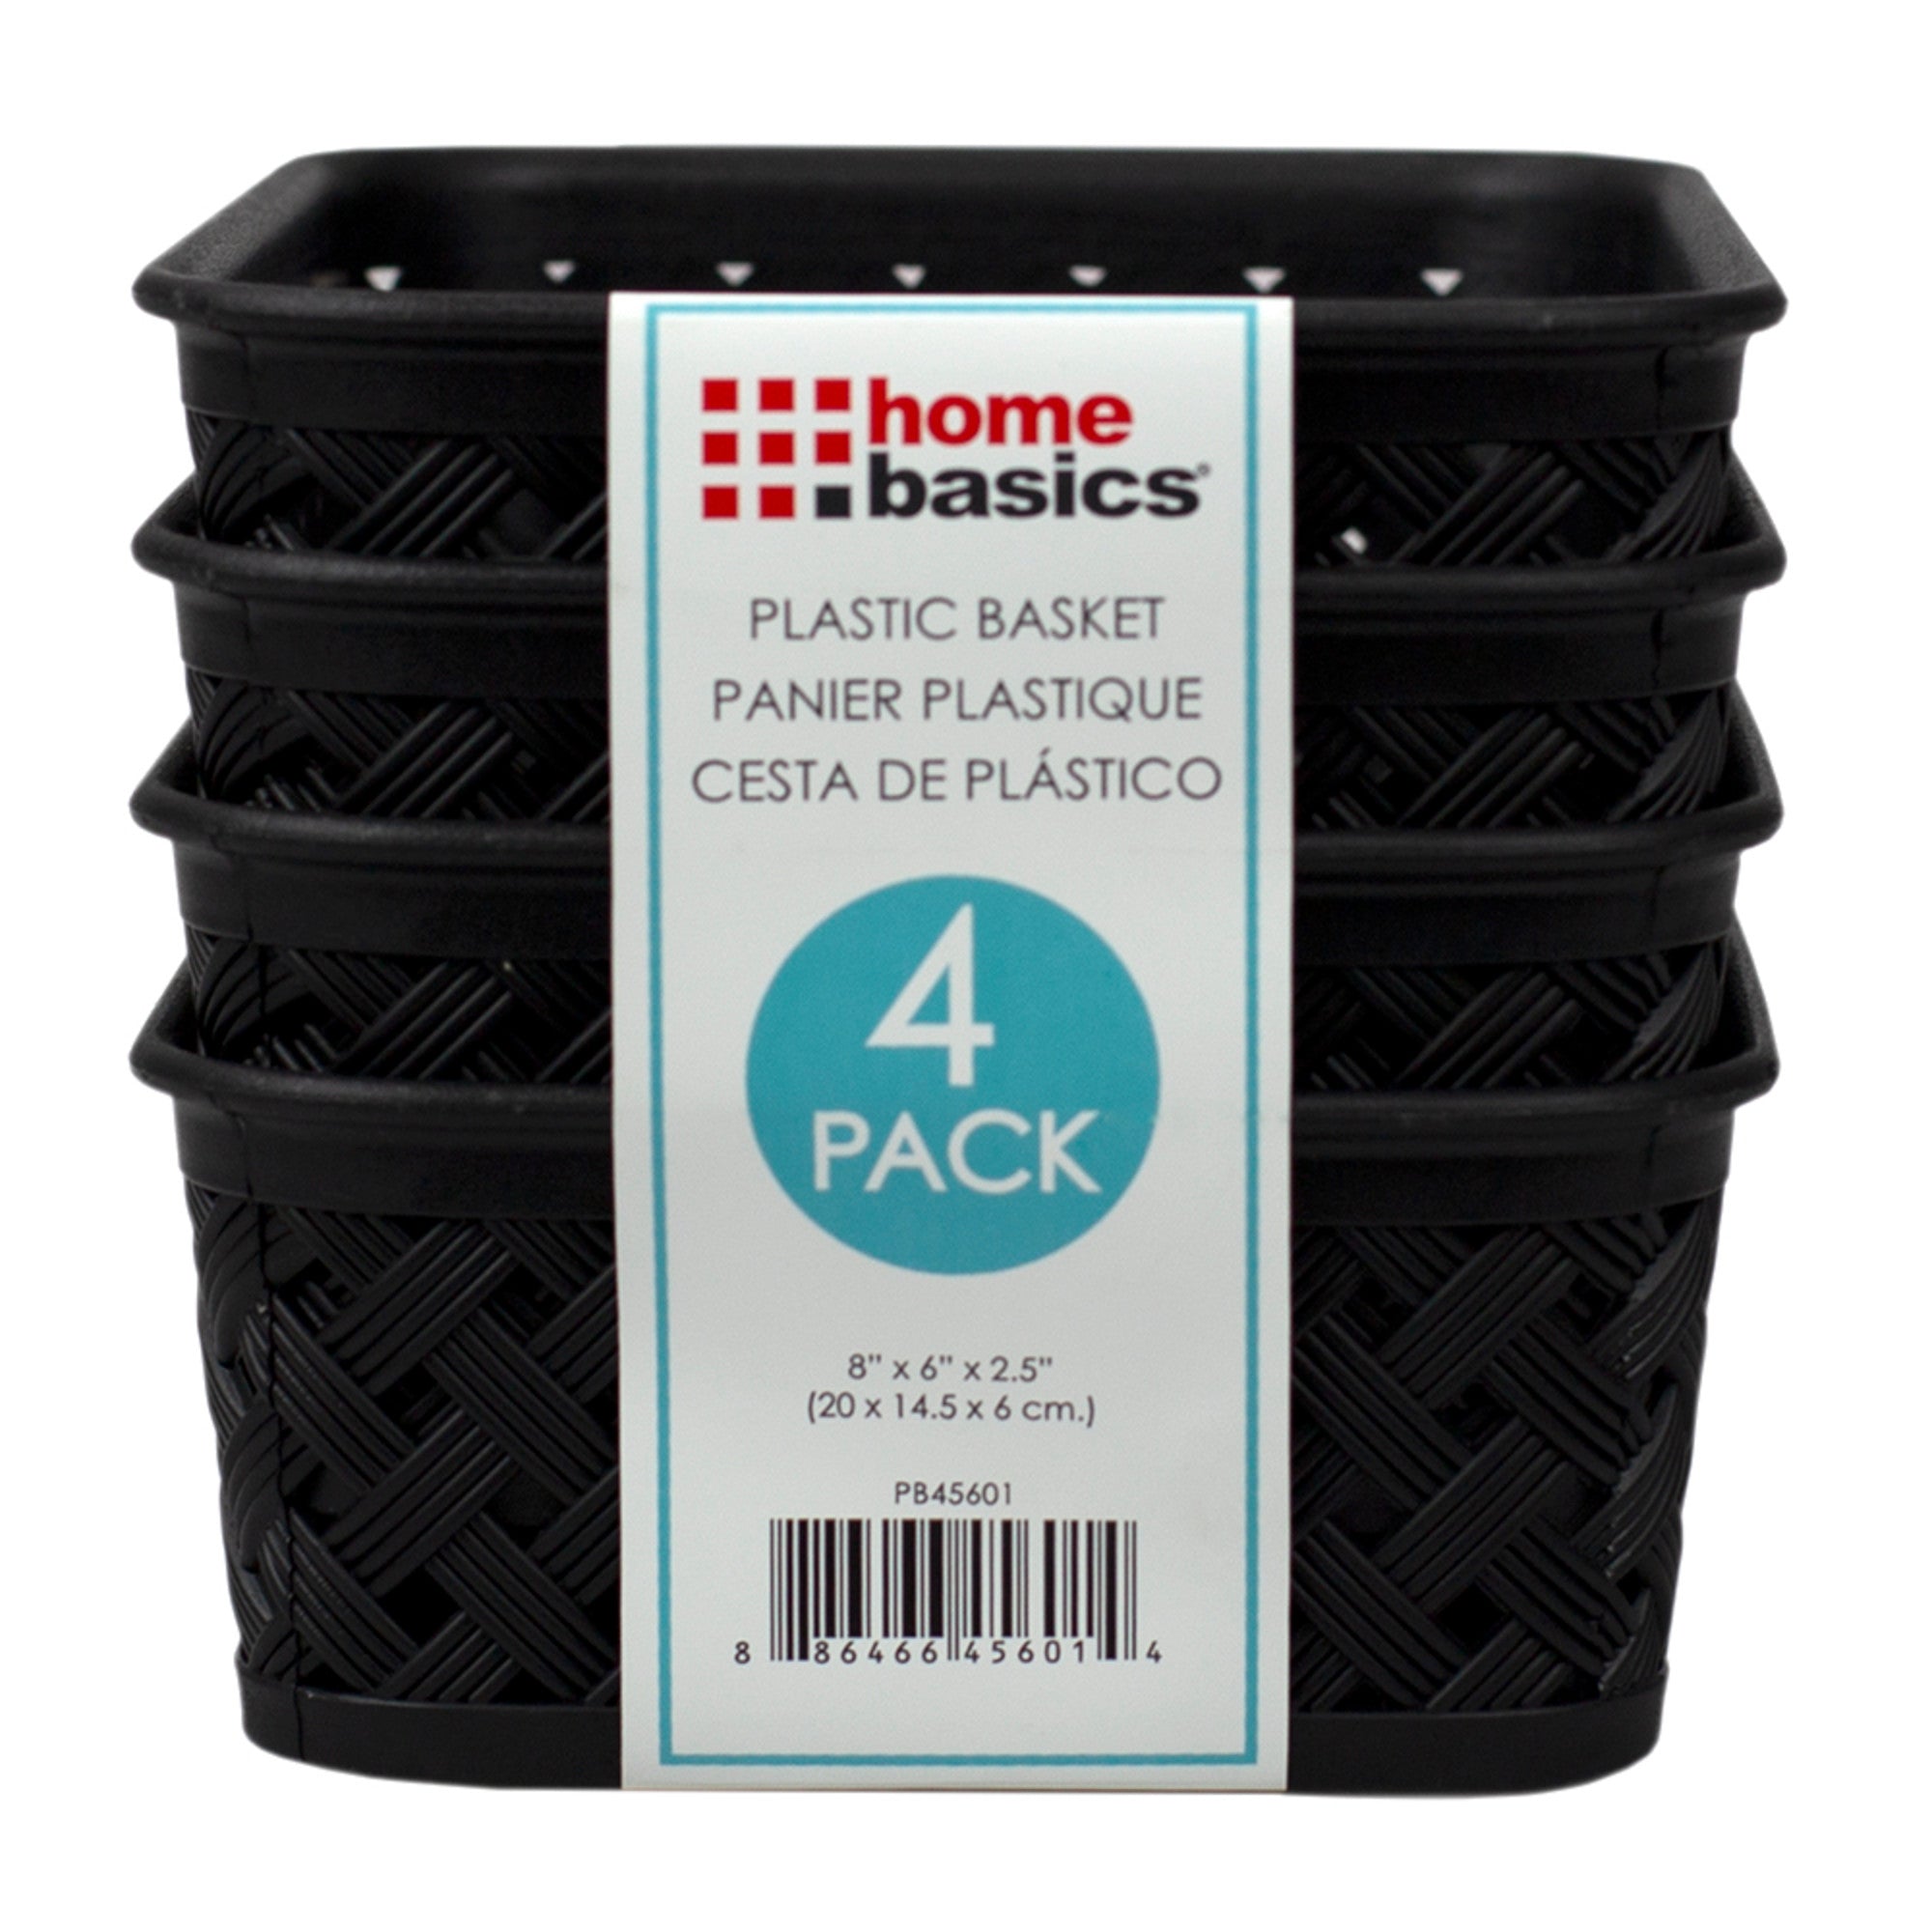 Home Basics Triple Woven 7.75" x 5.25" x 2.5" Multi-Purpose Stackable Plastic Storage Basket, (Pack of 4) - Assorted Colors